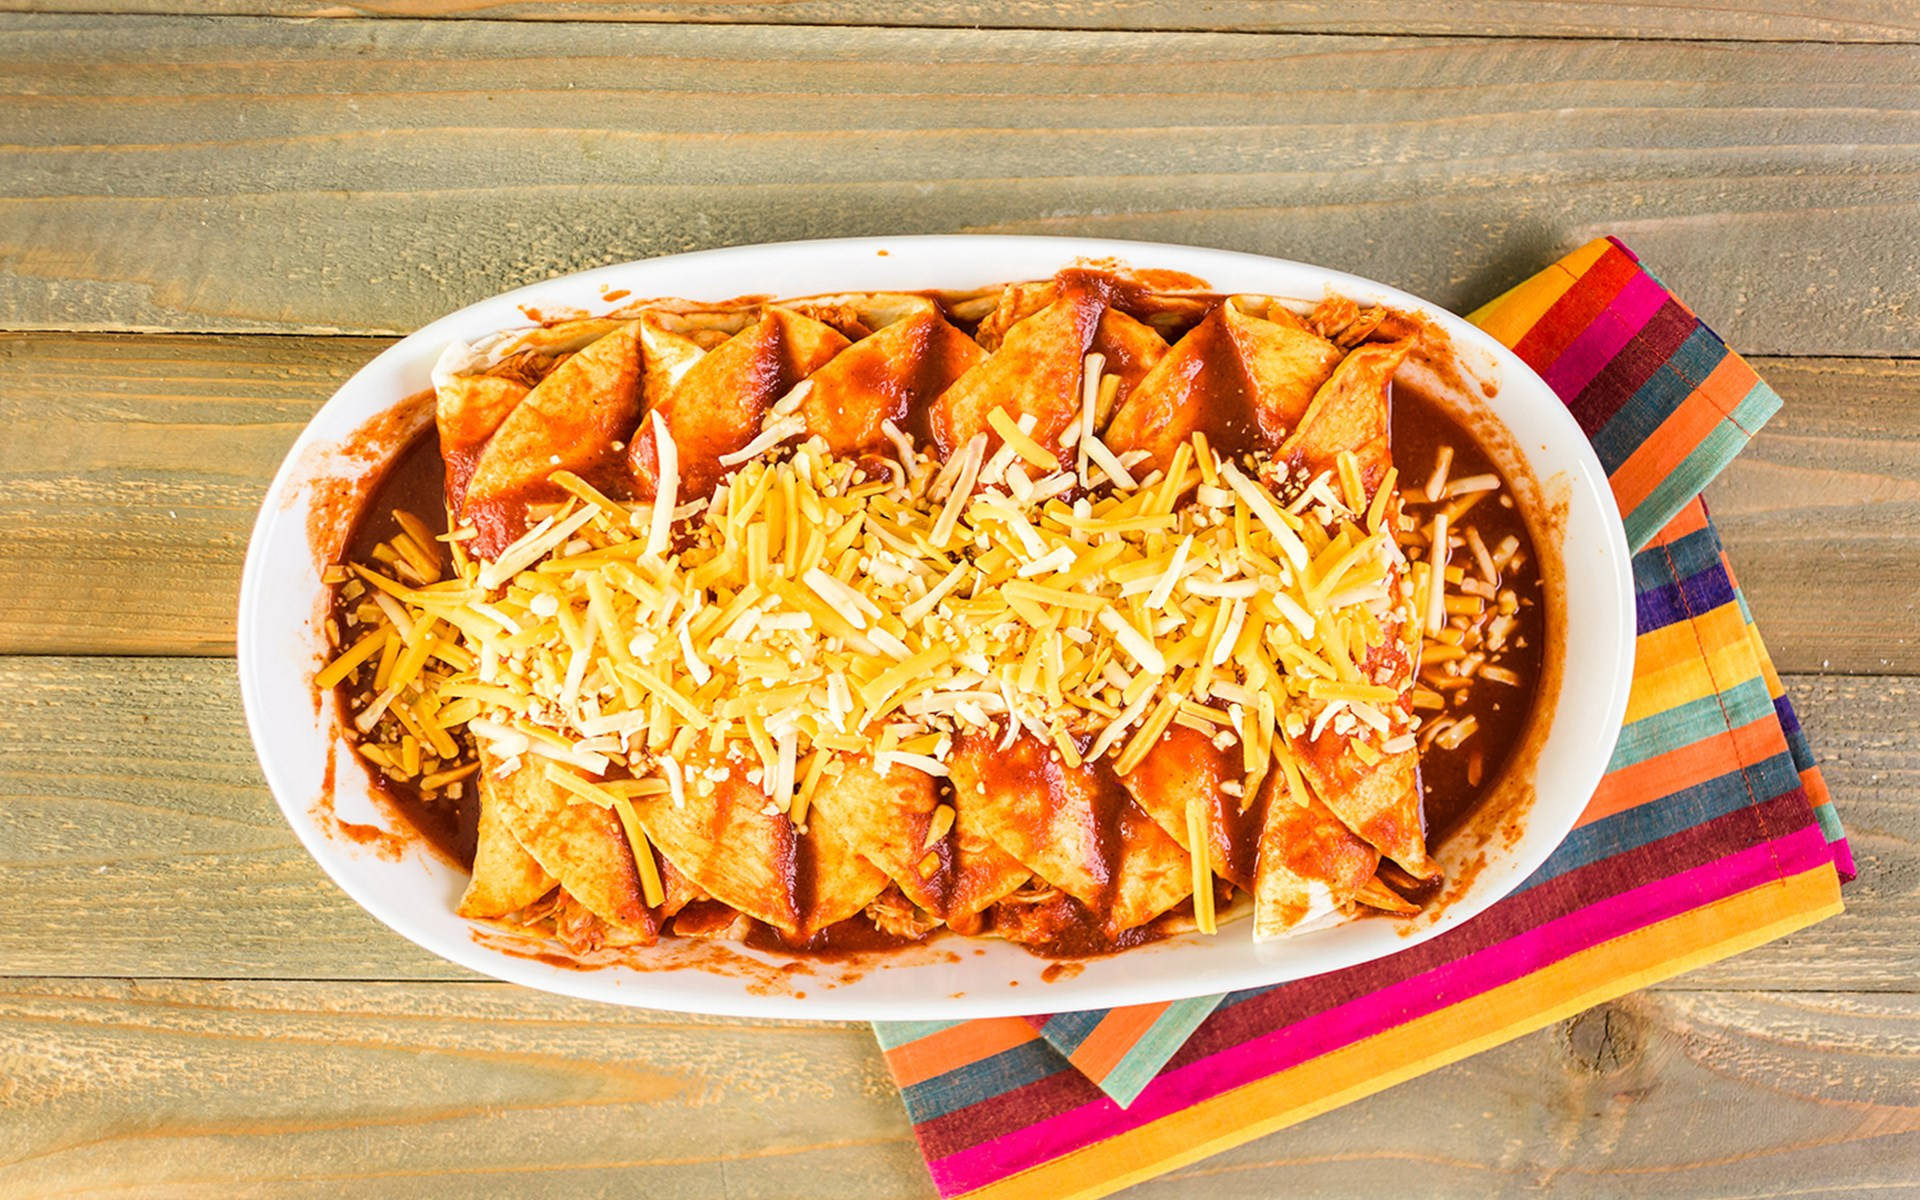 Delicious Enchilada Platter Topped with Cheddar Cheese. Wallpaper